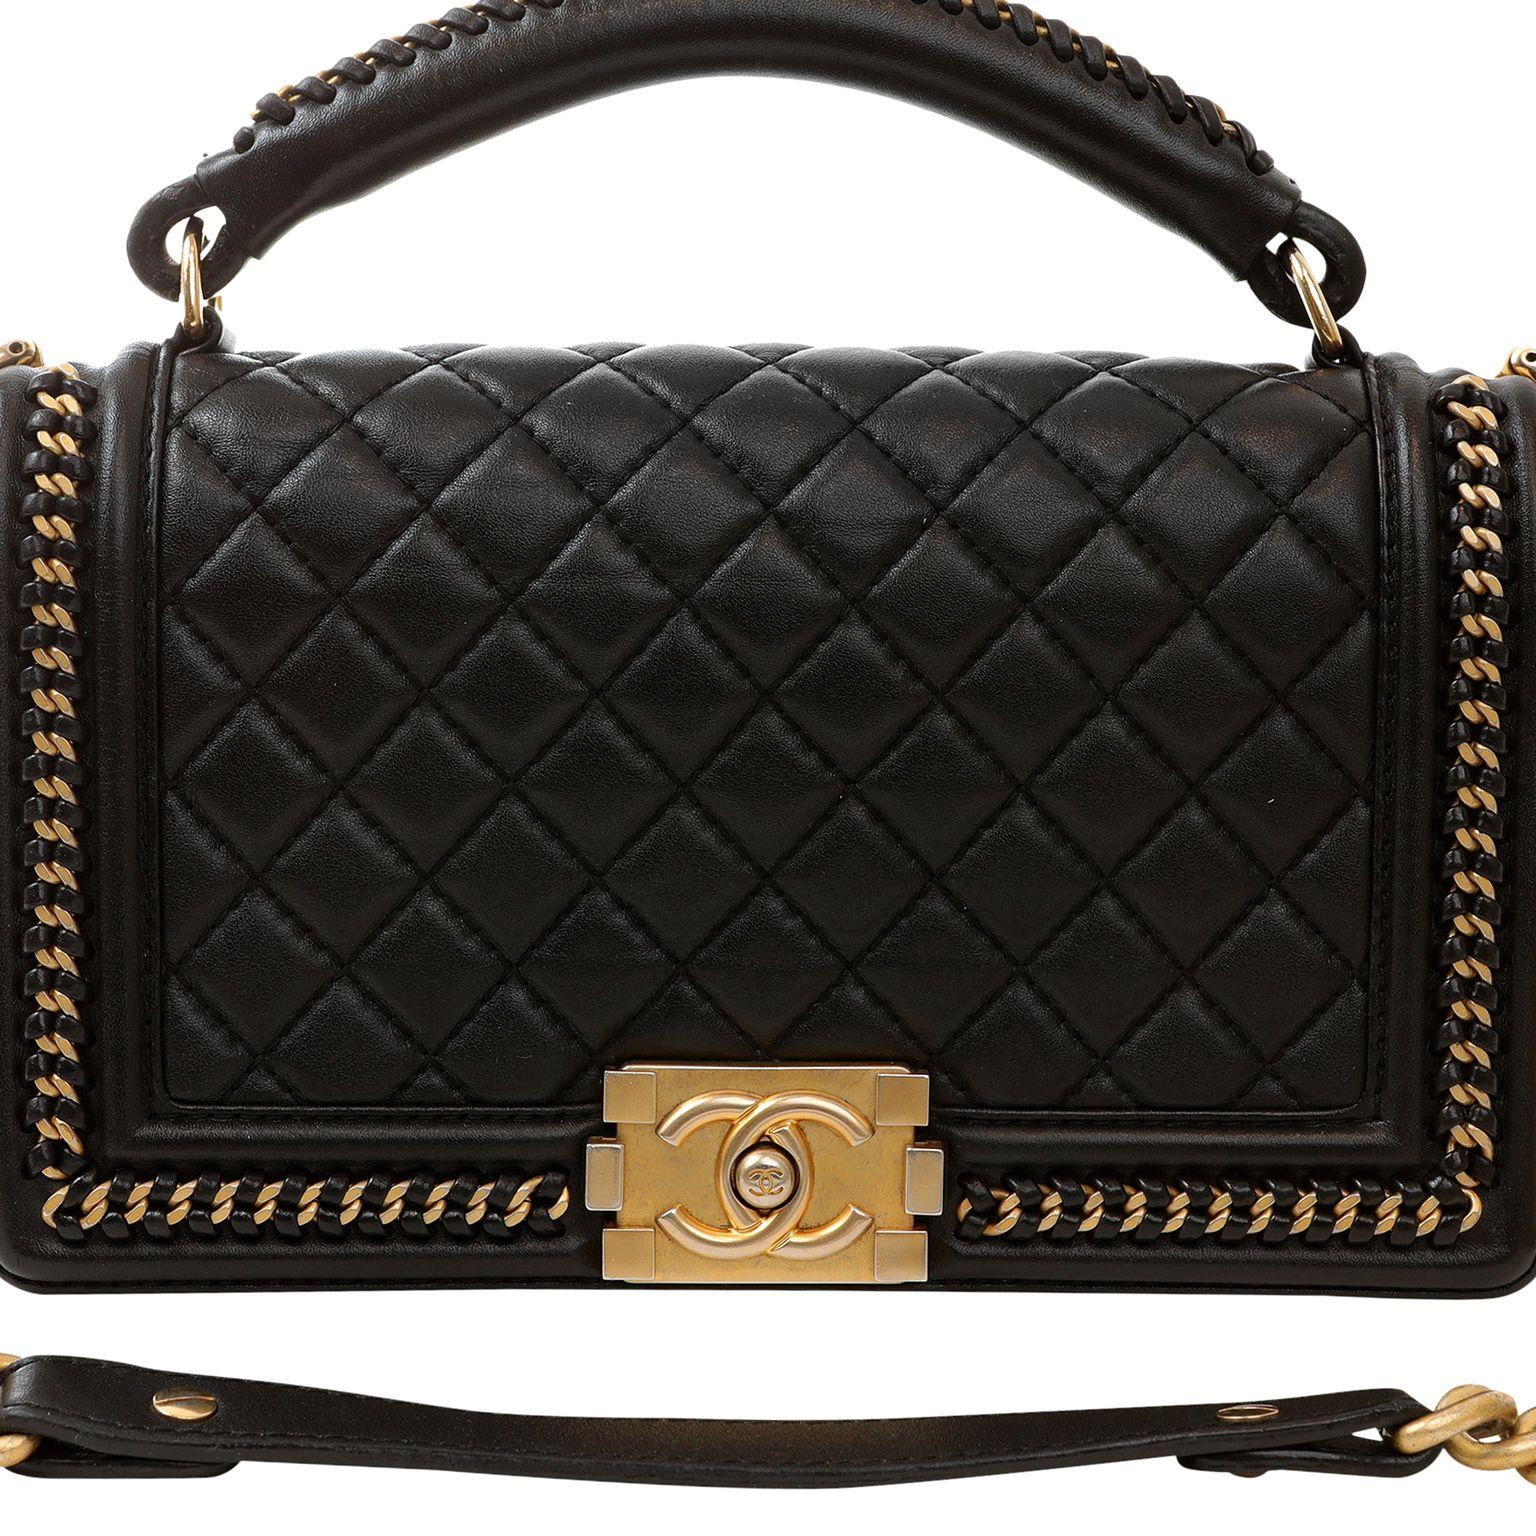 This authentic Chanel Black Lambskin Medium Chain Around Boy Bag is in pristine condition. The updated design is structured and edgy with a versatility that makes it extremely popular.  Black lambskin is quilted in signature Chanel diamond stitched